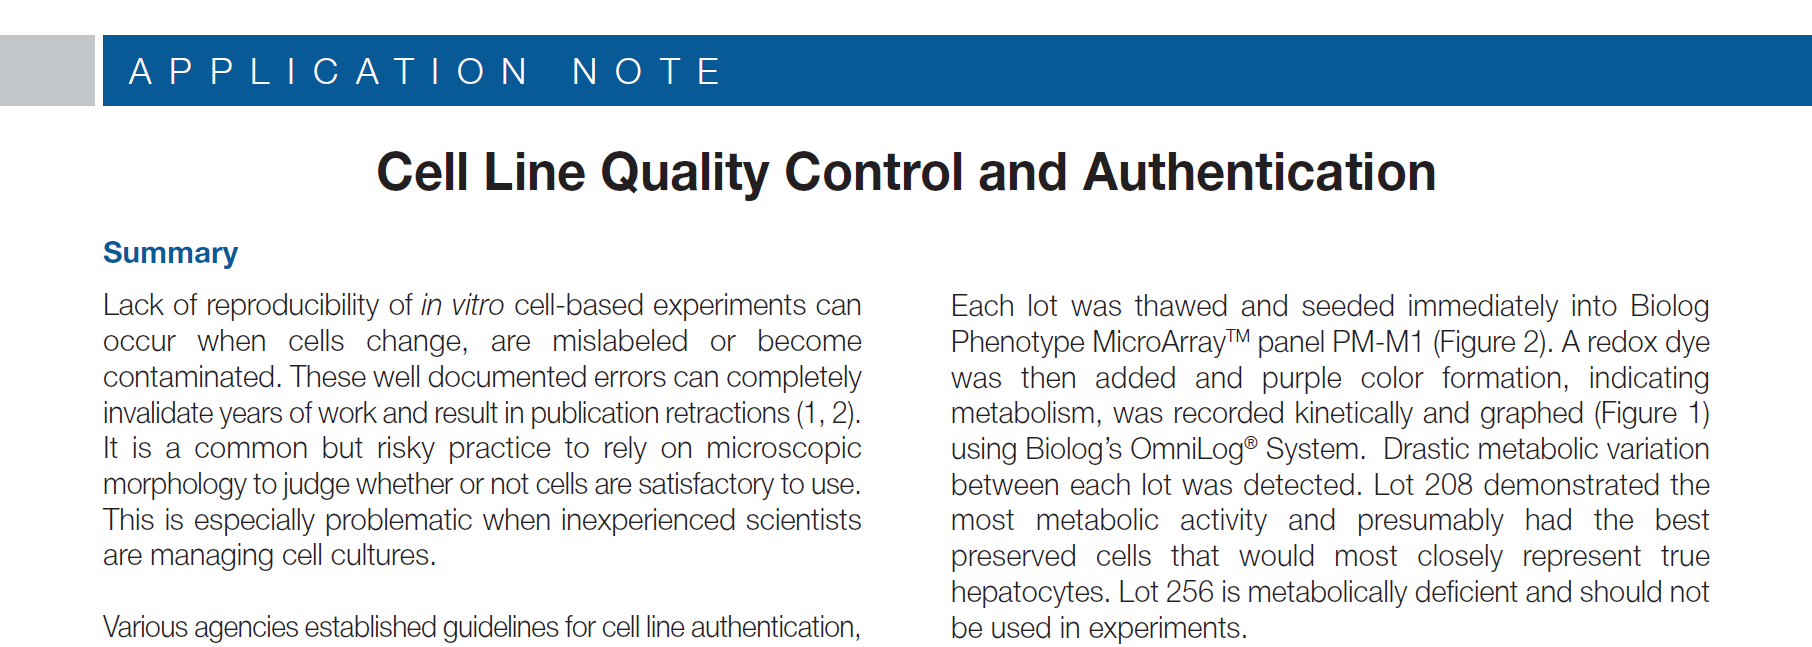 Cell Line Quality Control and Authentication_1.PNG